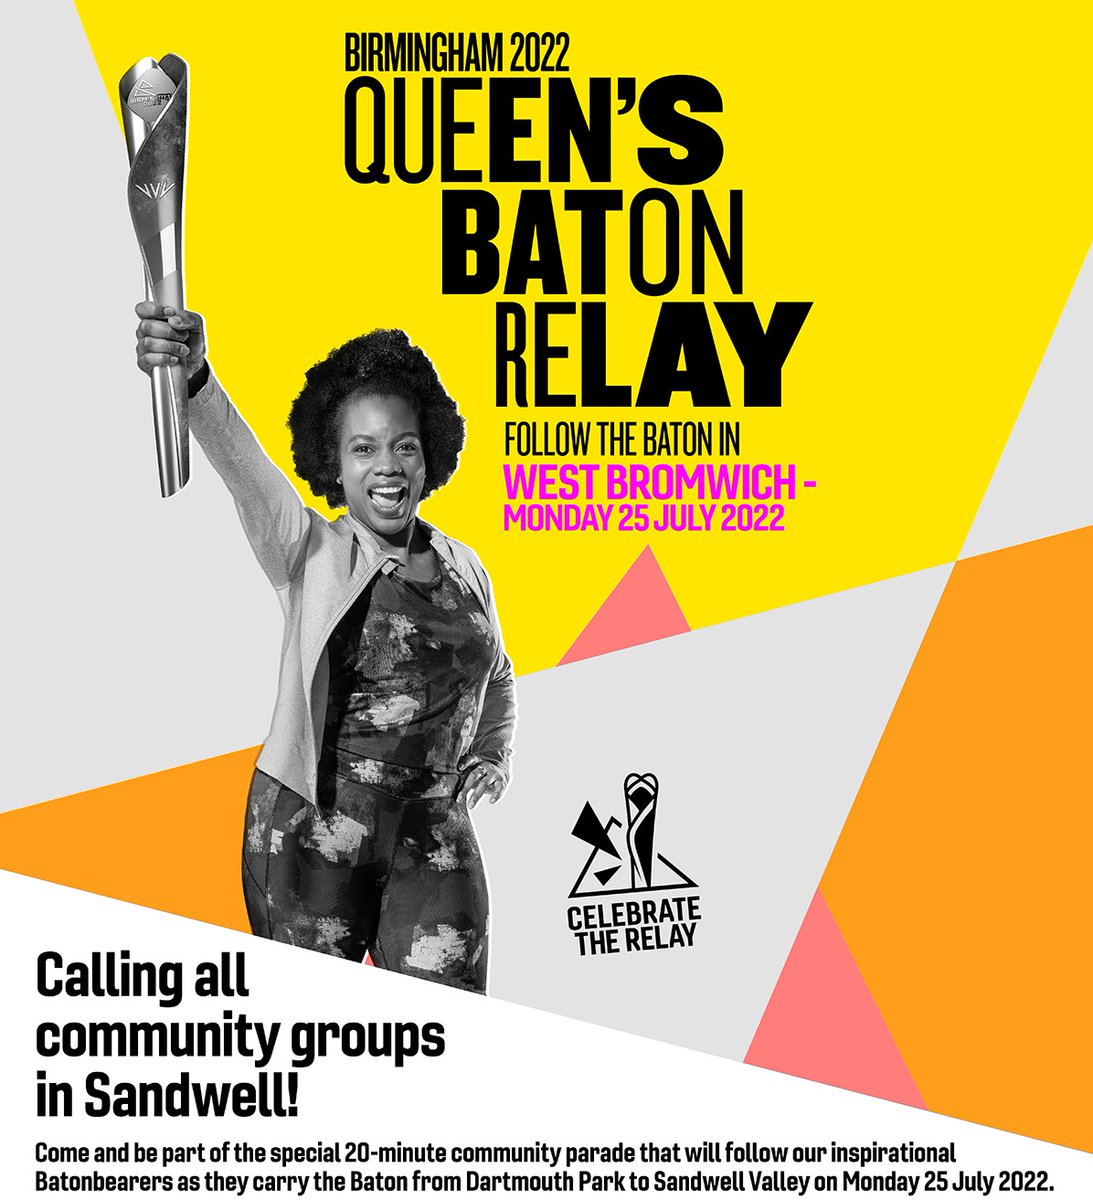 📢📢📢Calling all community groups in Sandwell! 🏆🏆Come and be part of the special 20-minute community parade that will follow our inspirational Batonbearers as they carry the Baton from Dartmouth Park to Sandwell Valley Country Park next Monday (25 July 2022) #QBR22 #QBR